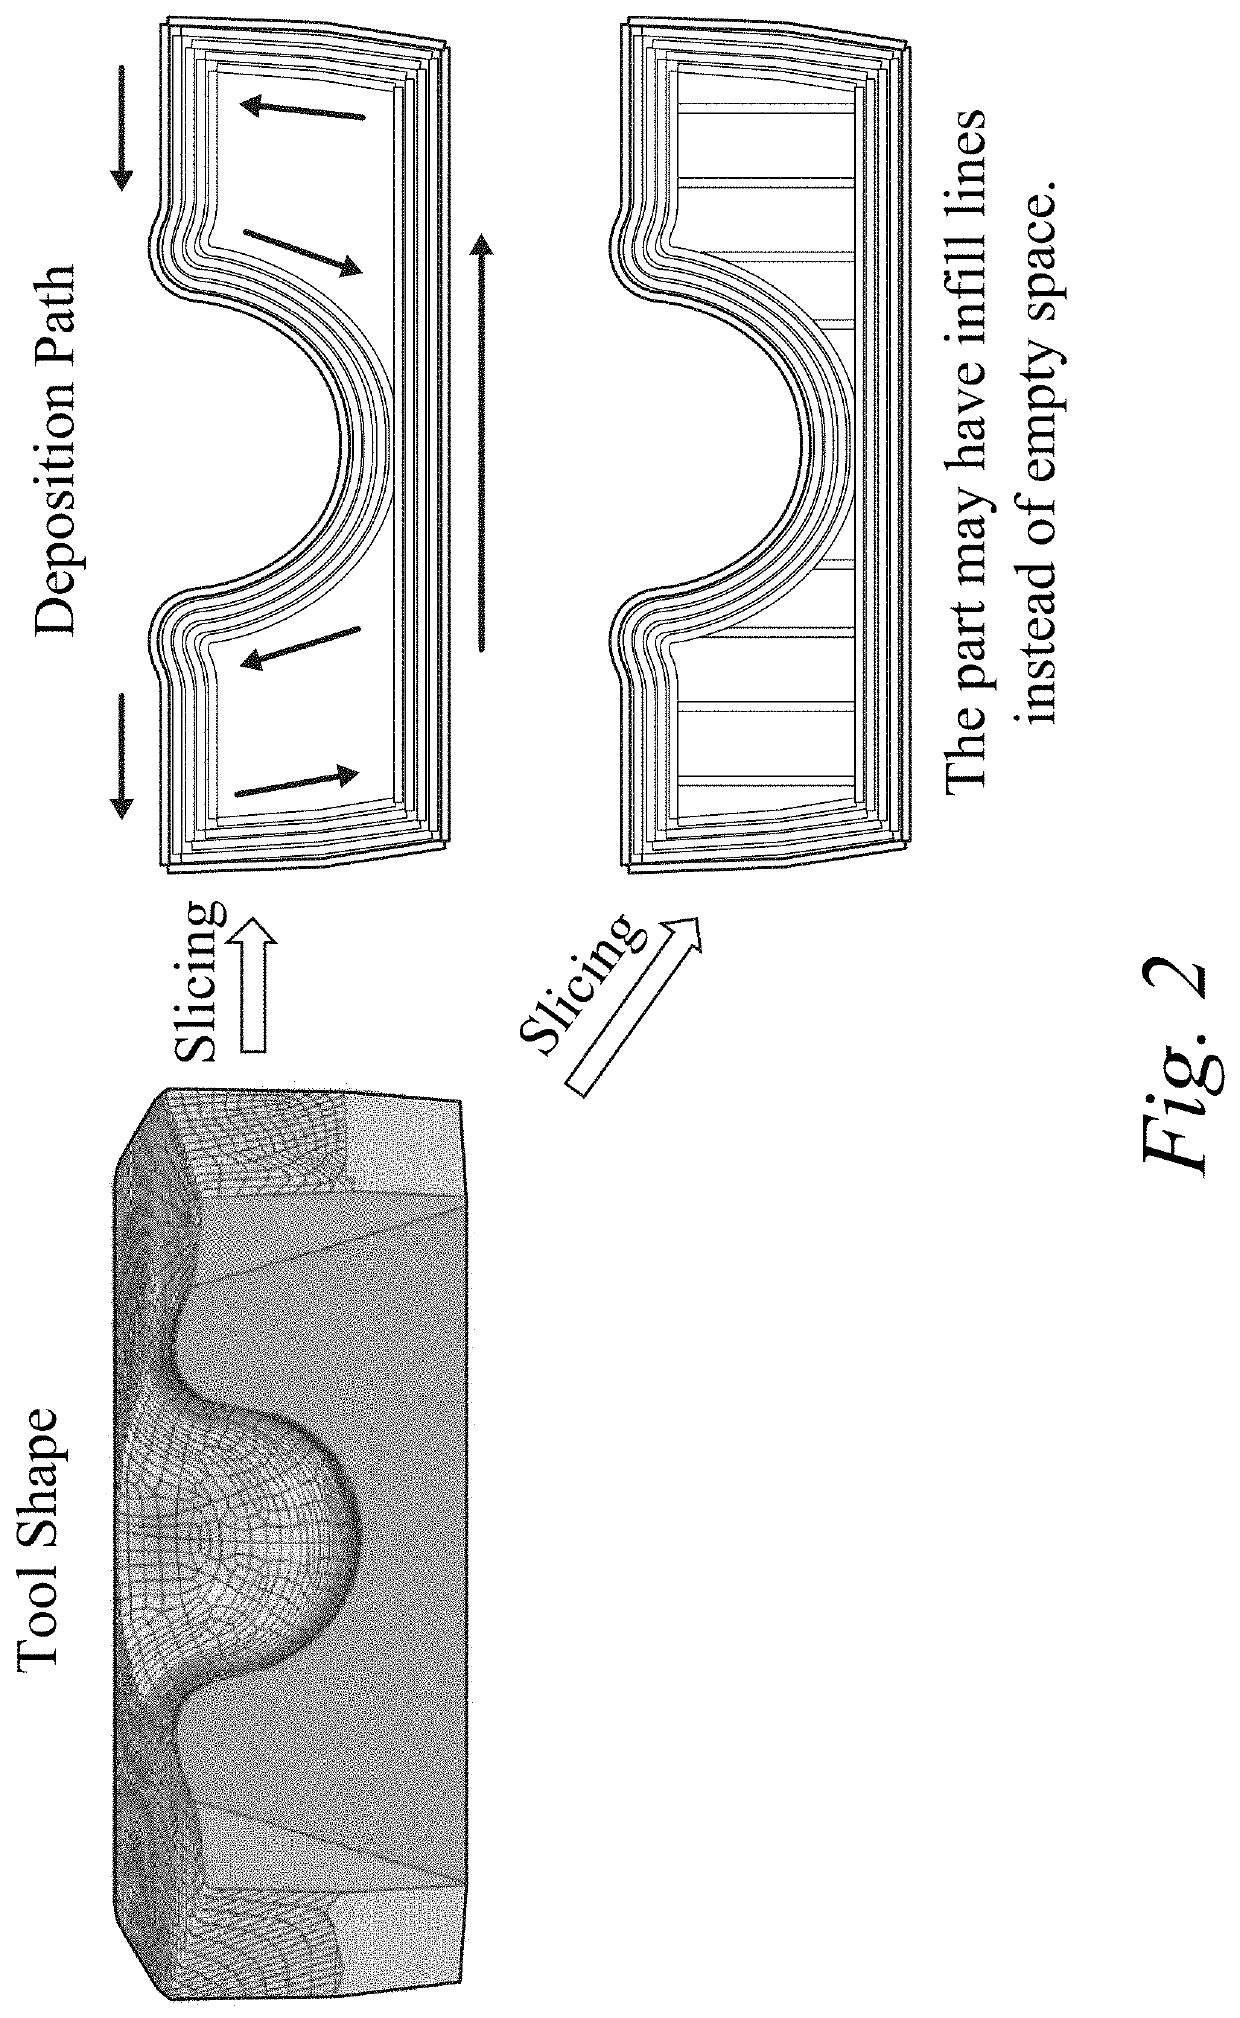 System and method for simulation-assisted additive manufacturing